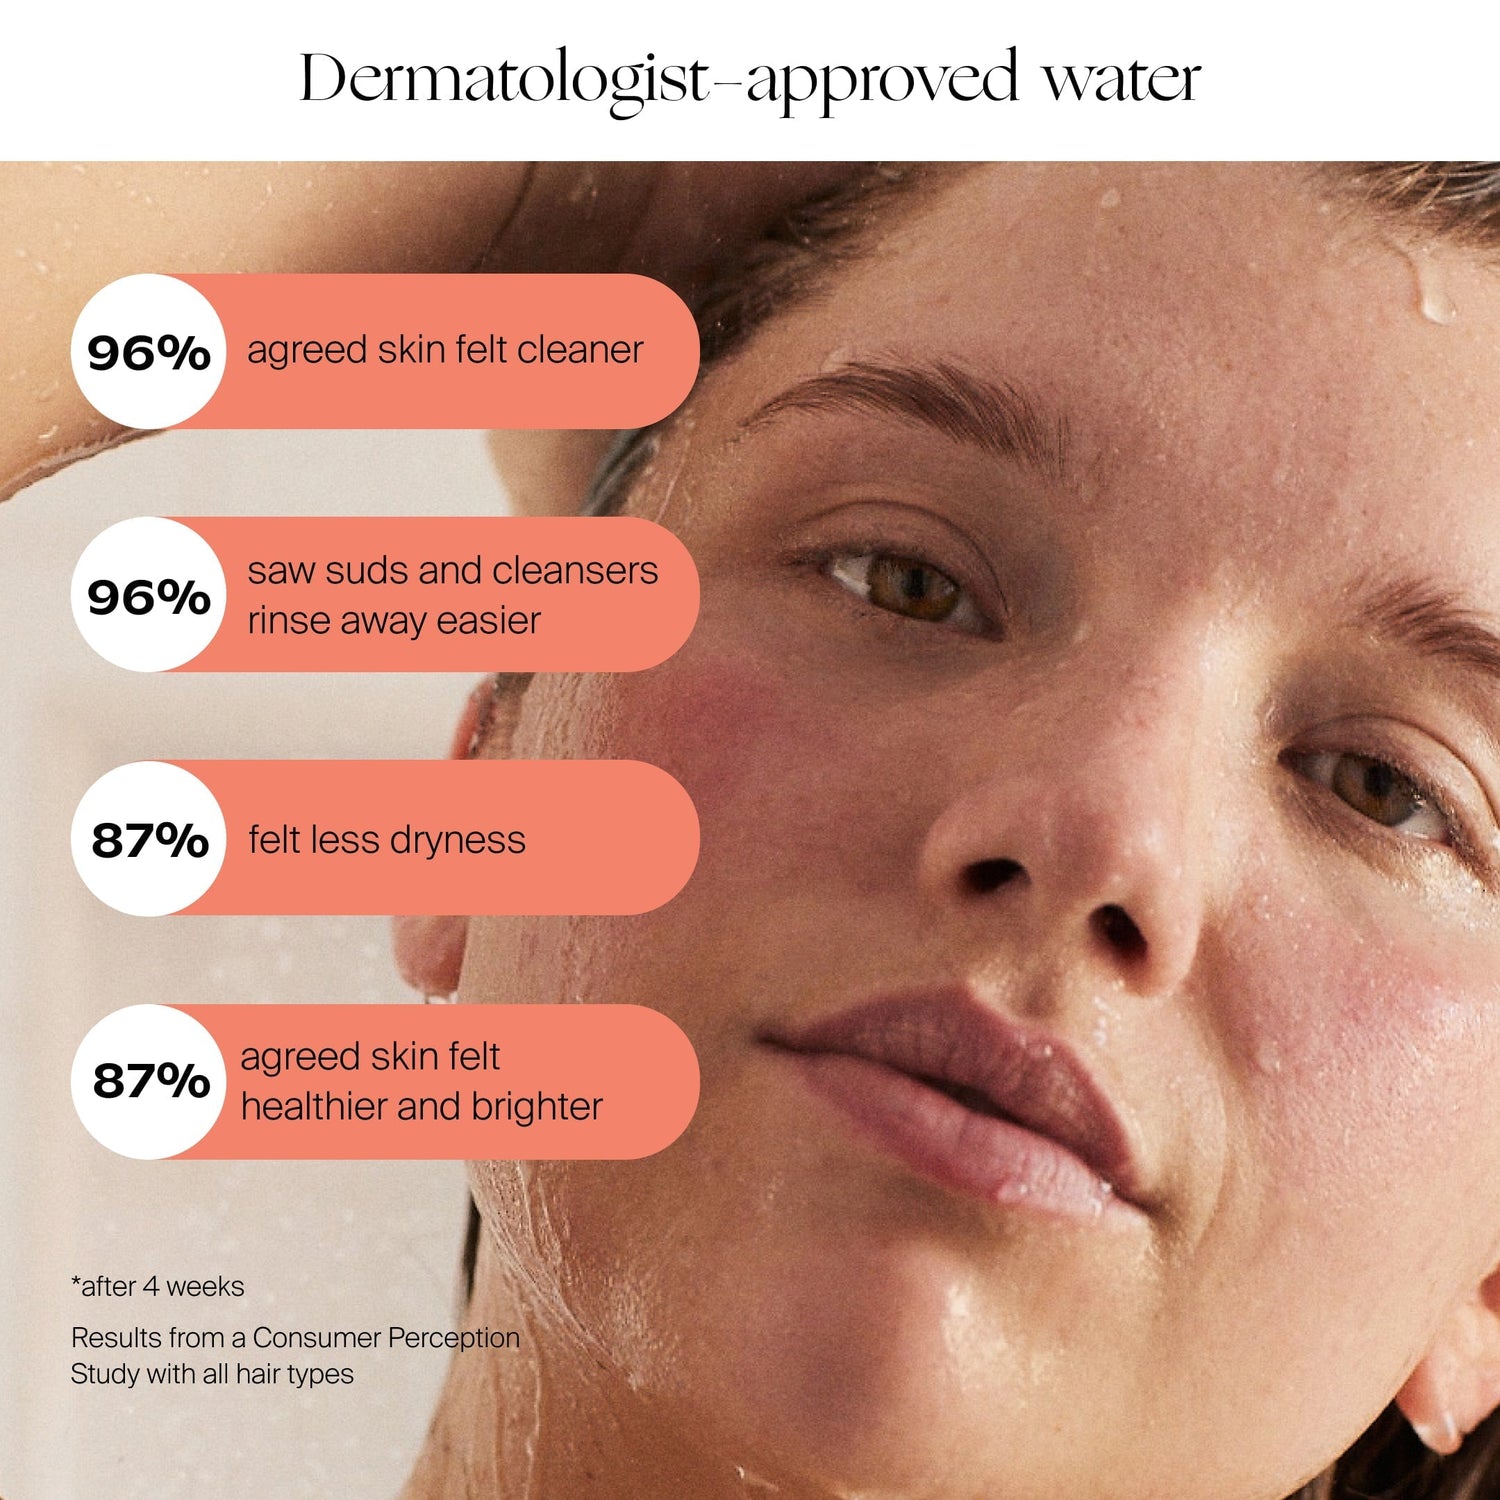 Handheld Filtered Showerhead | Lifestyle, Dermatologist-approved water